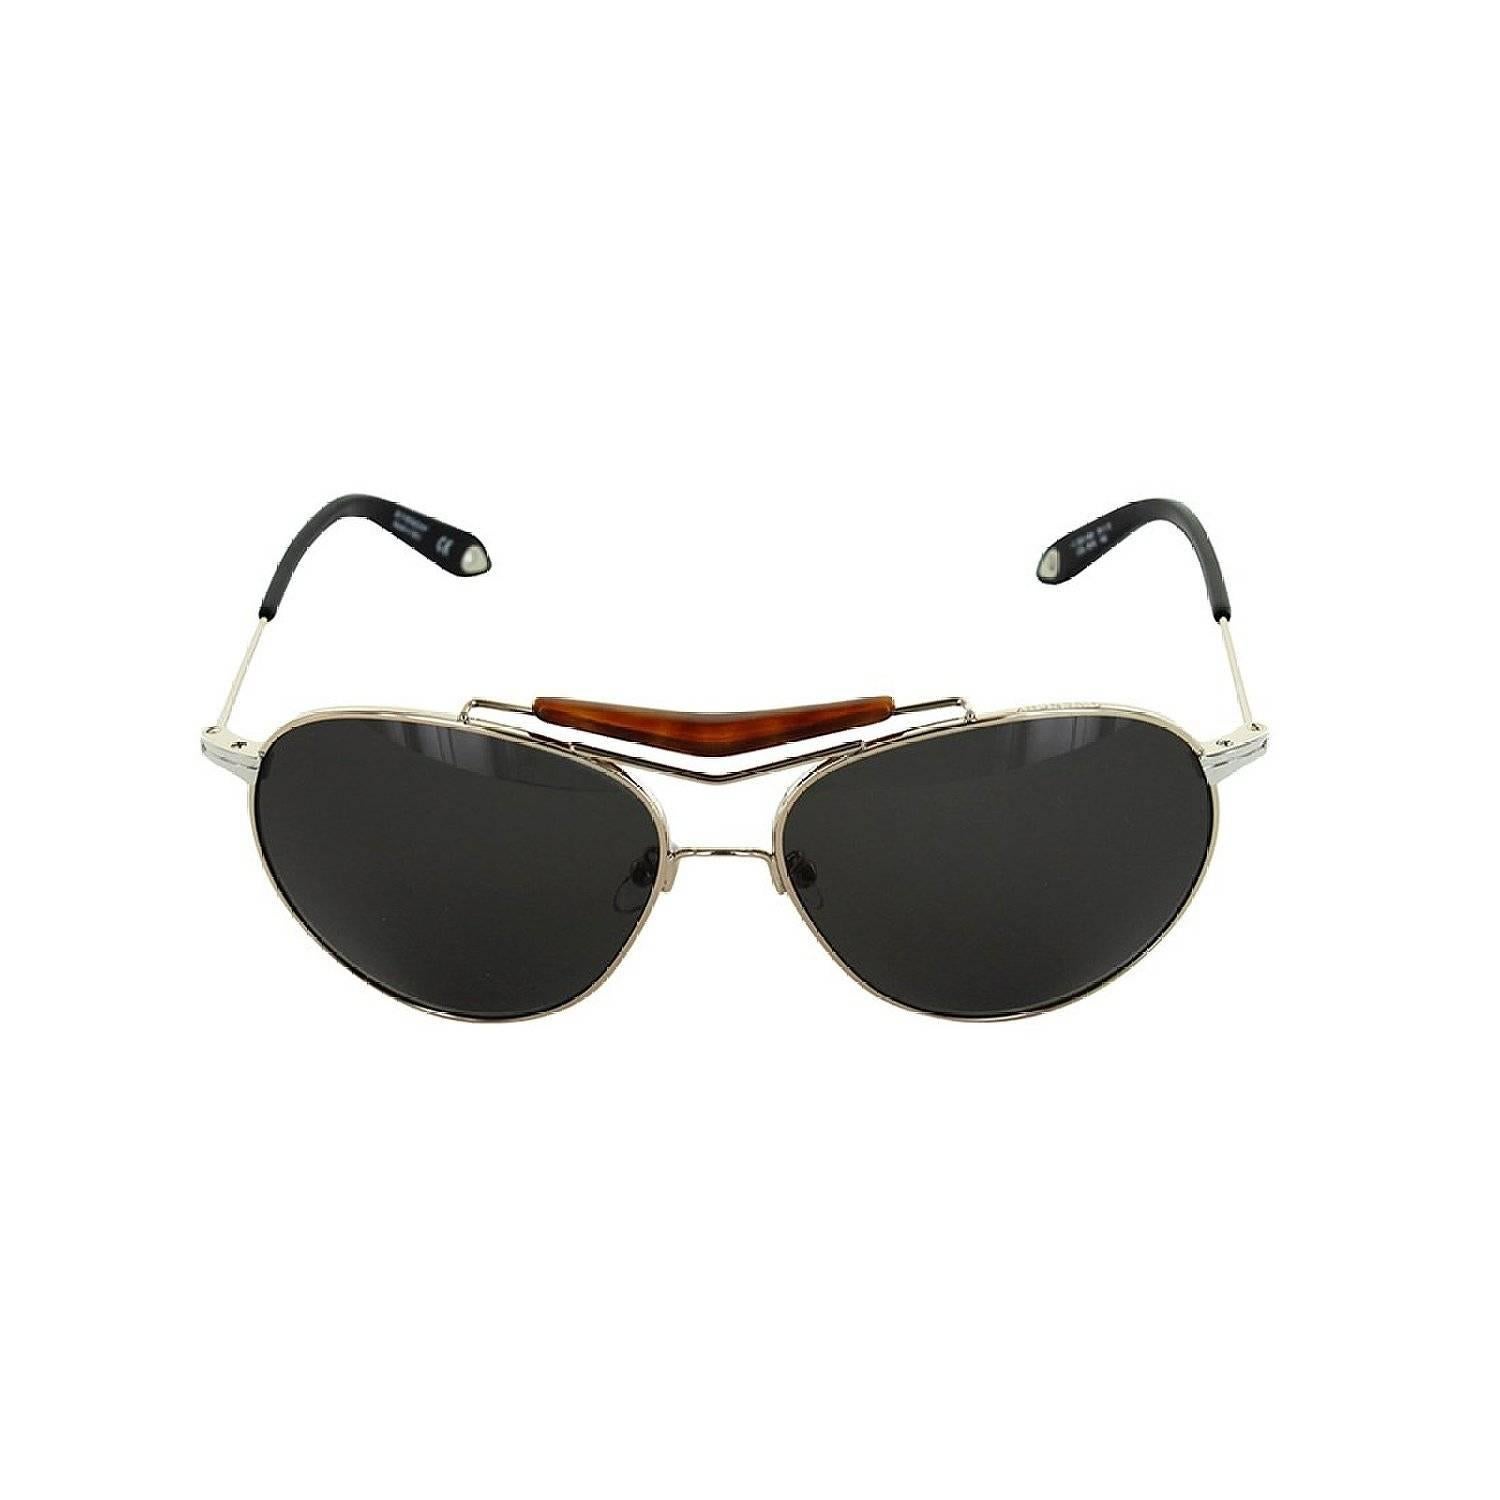 Aspiering Givenchy aviator Womens Sunglasses in GREY color metal frame plastic lens non-polarized Lens width: 59 Bridge: 15 Arm: 140 Imported Shape: aviator_Size: 59-15-140 Color: PALE GOLD HAVANA Made in Italy- Comes in original Givenchy packaging,